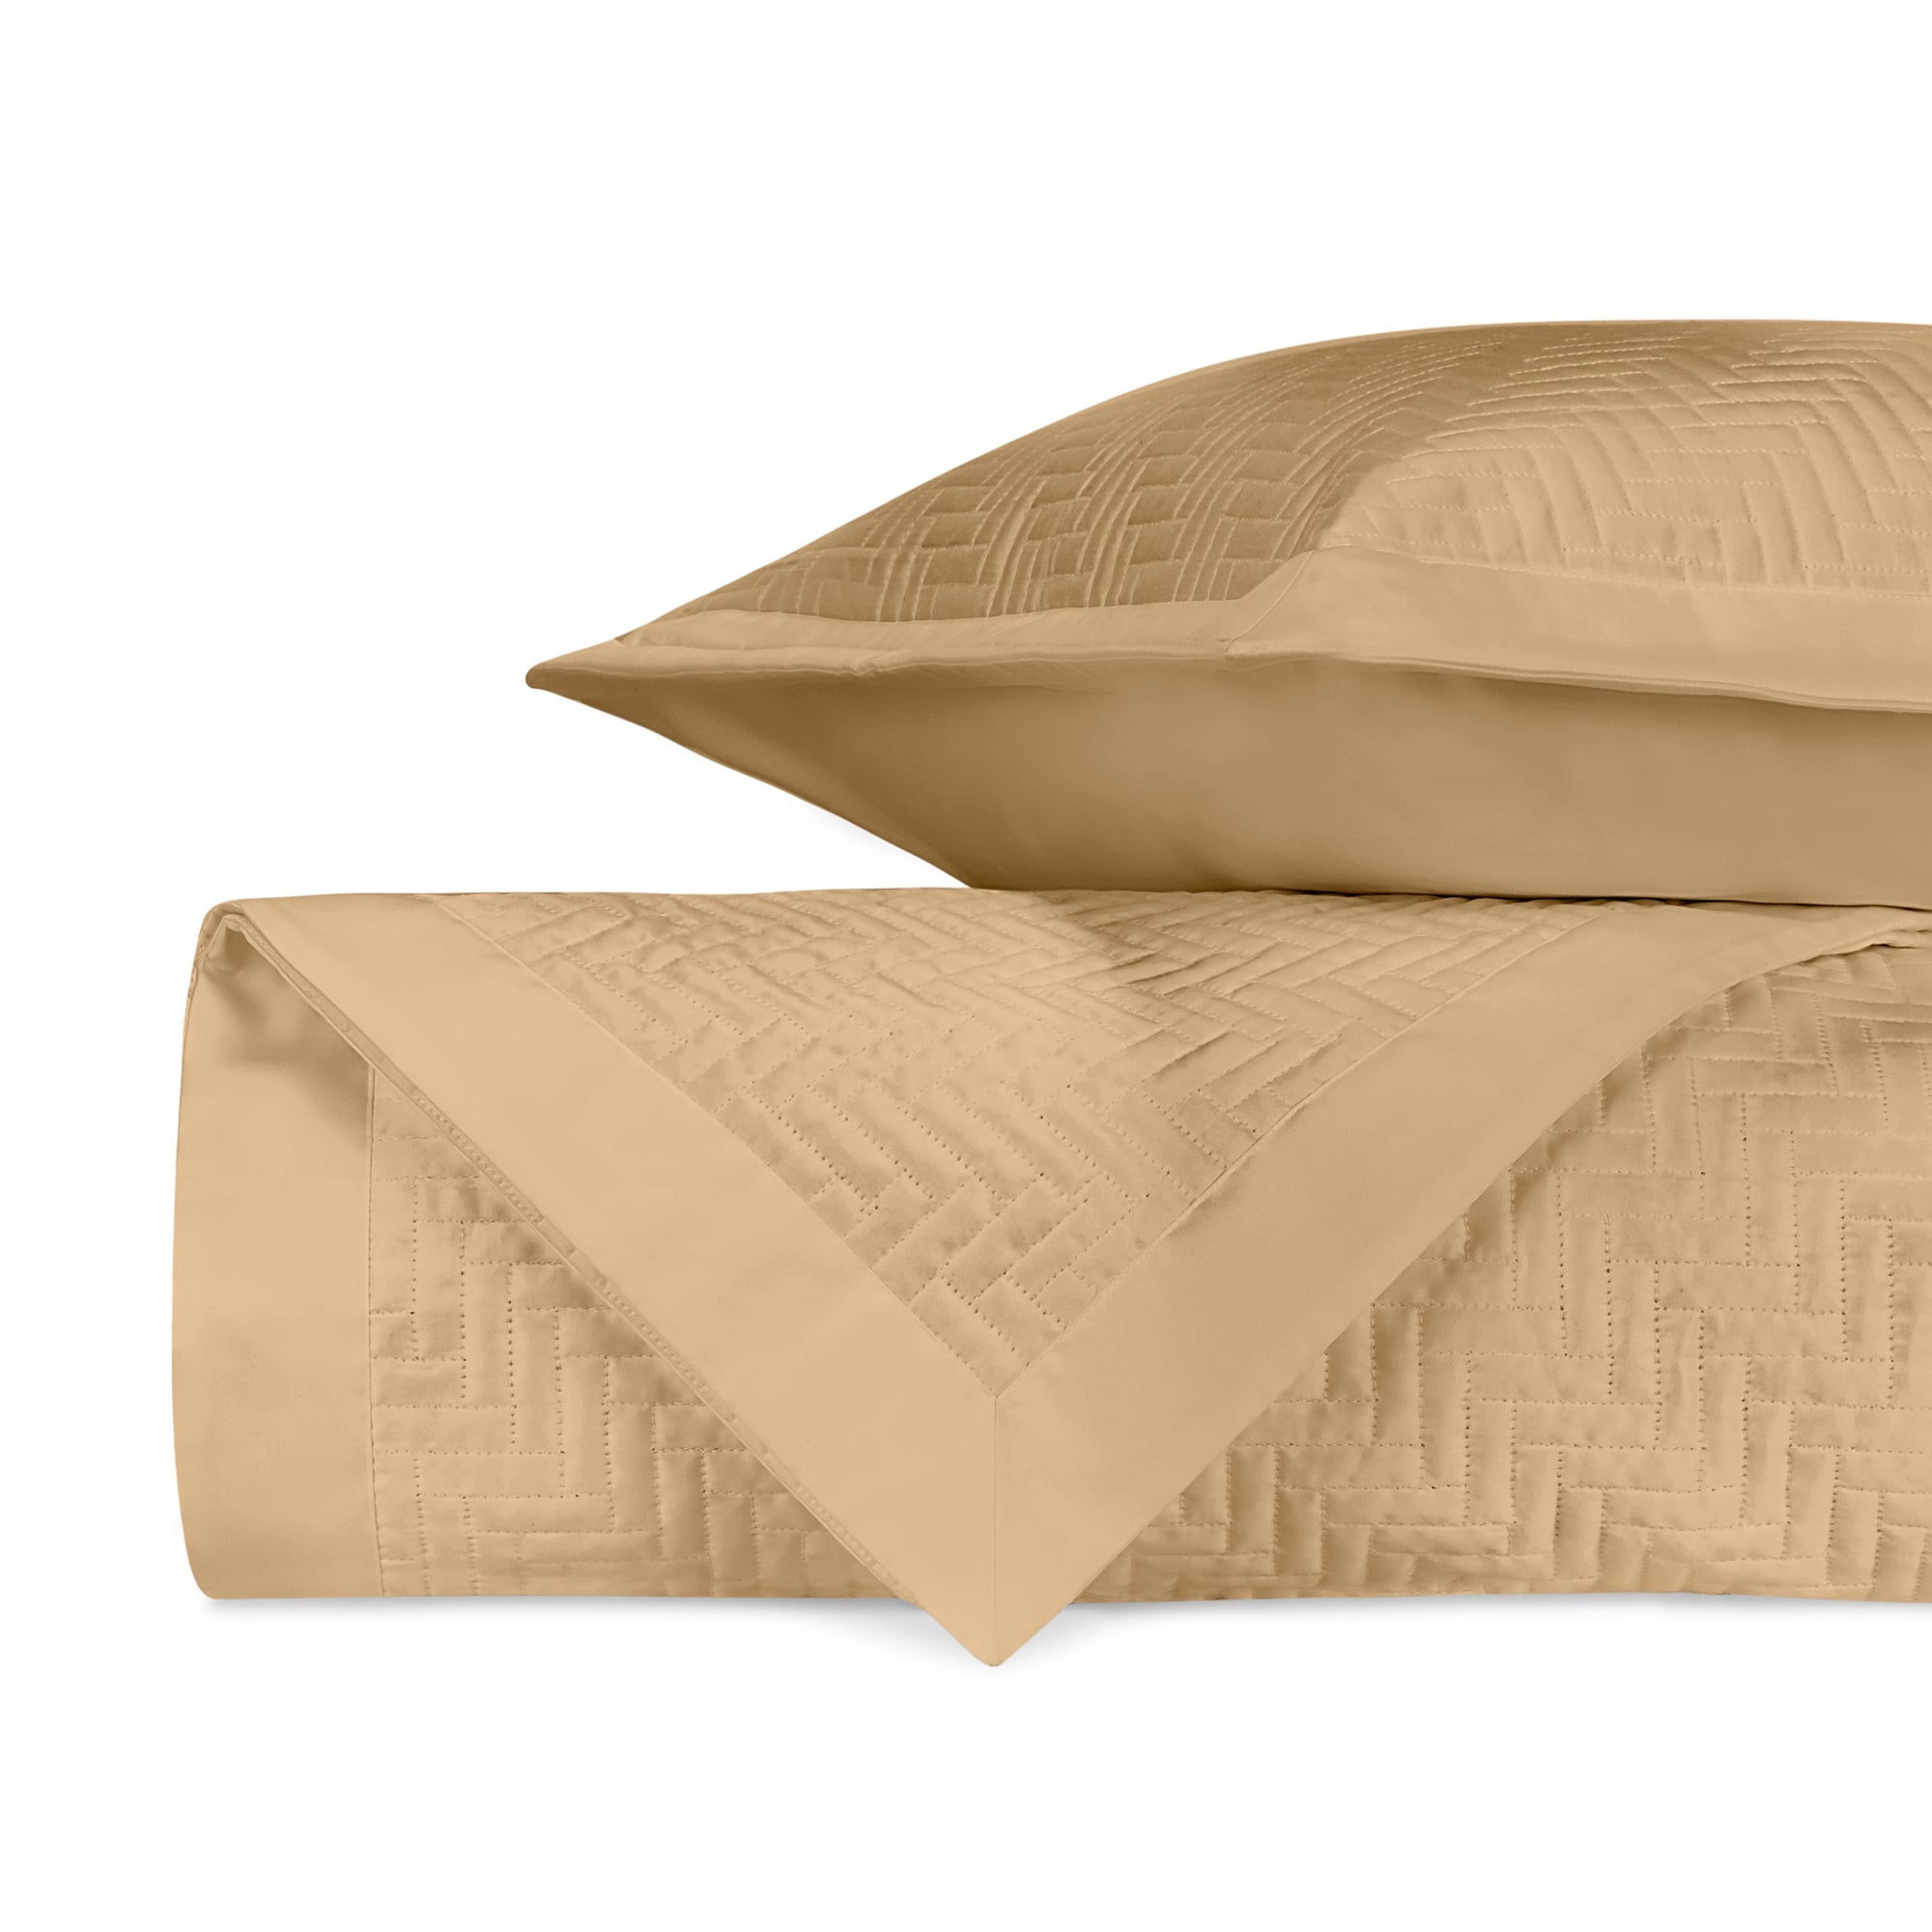 Stack Image of Home Treasures Baxter Royal Sateen Quilted Bedding in Color Gold